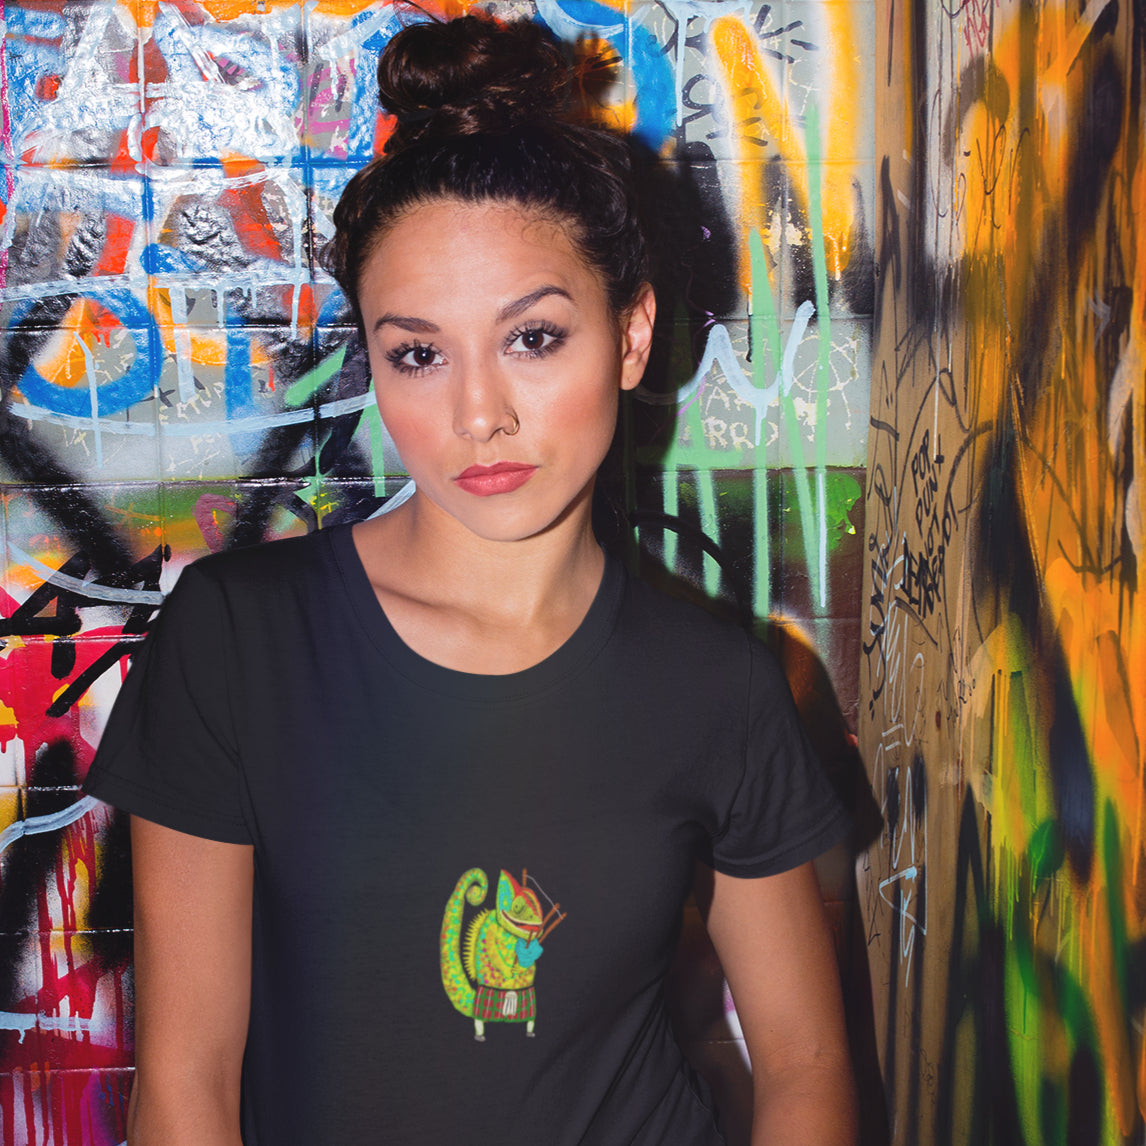 Bagpiper Chameleon | Women's 100% Organic Cotton T Shirt worn by a woman in front of a wall